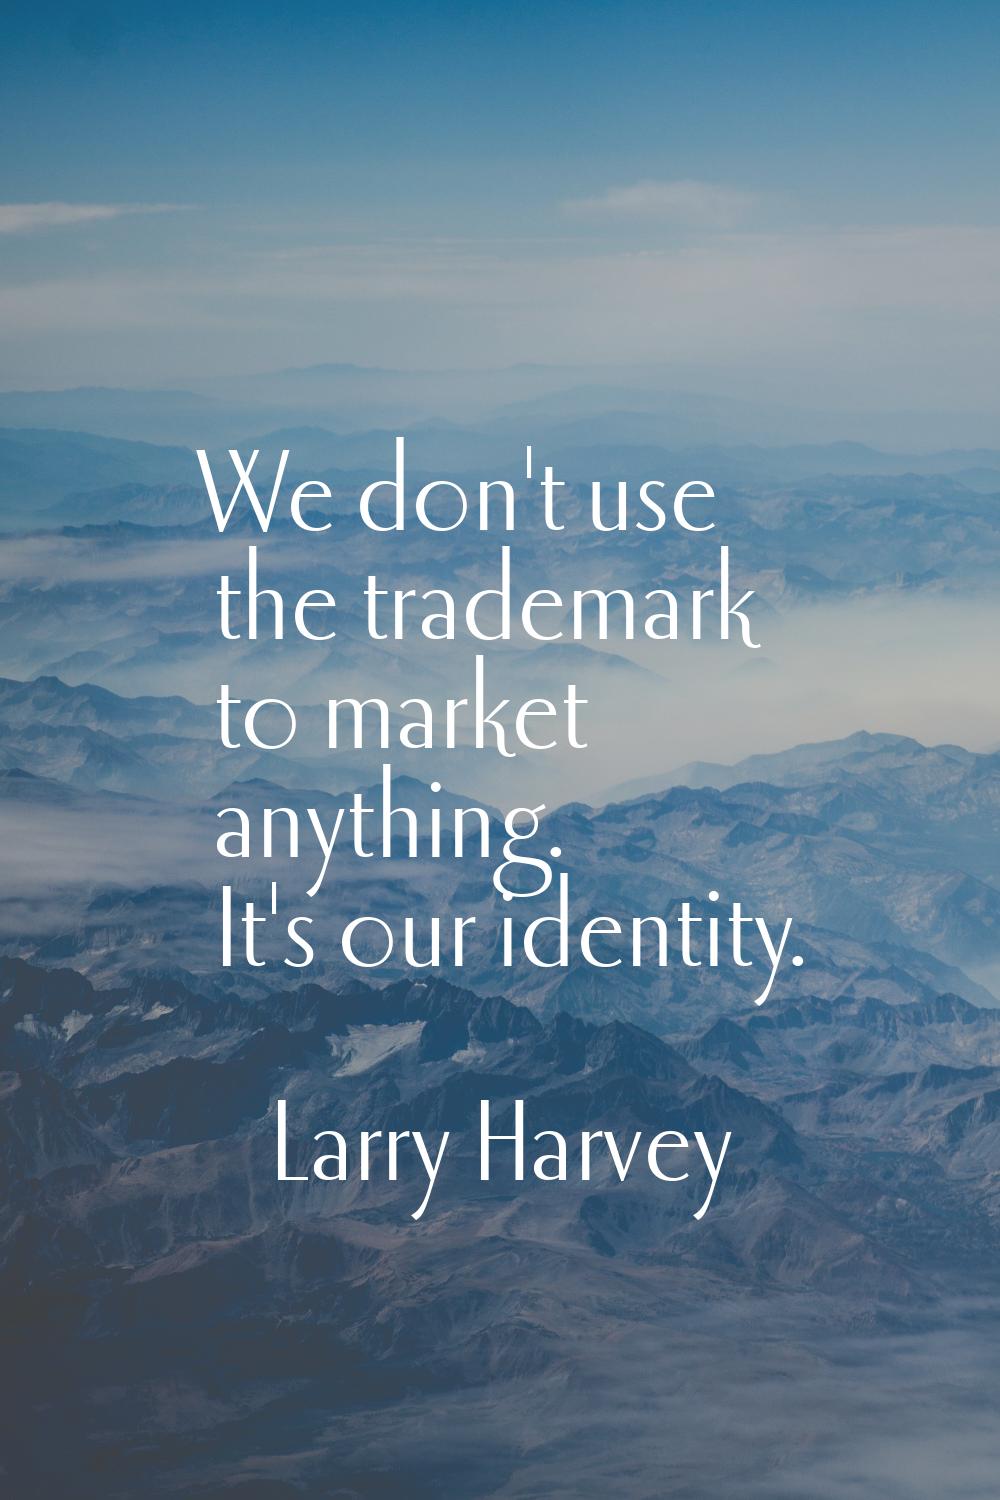 We don't use the trademark to market anything. It's our identity.